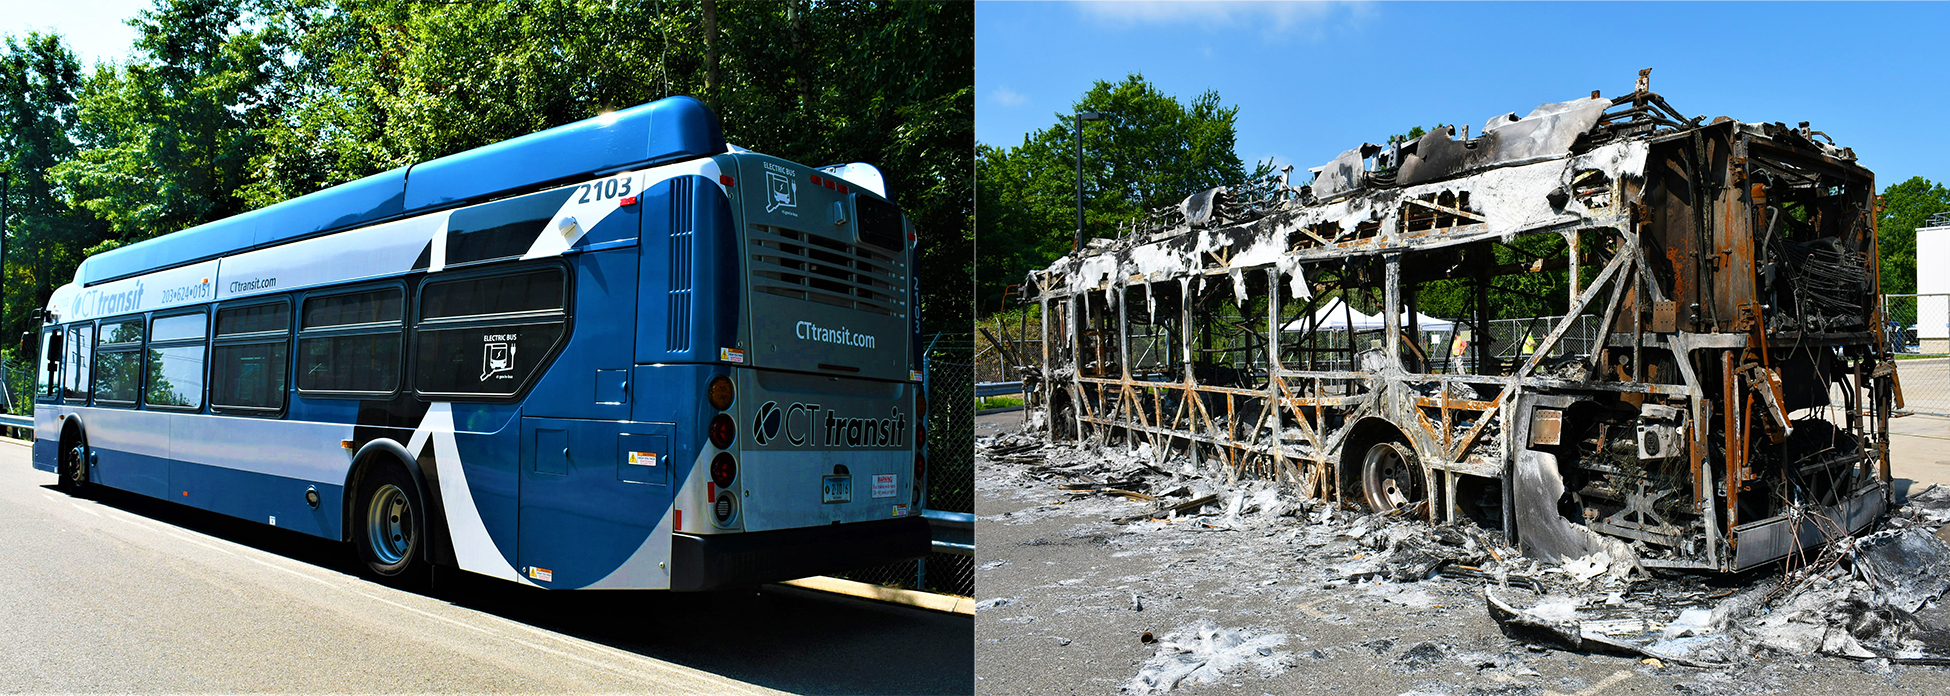 Photos of exemplar and post-fire CTtransit battery electric bus.